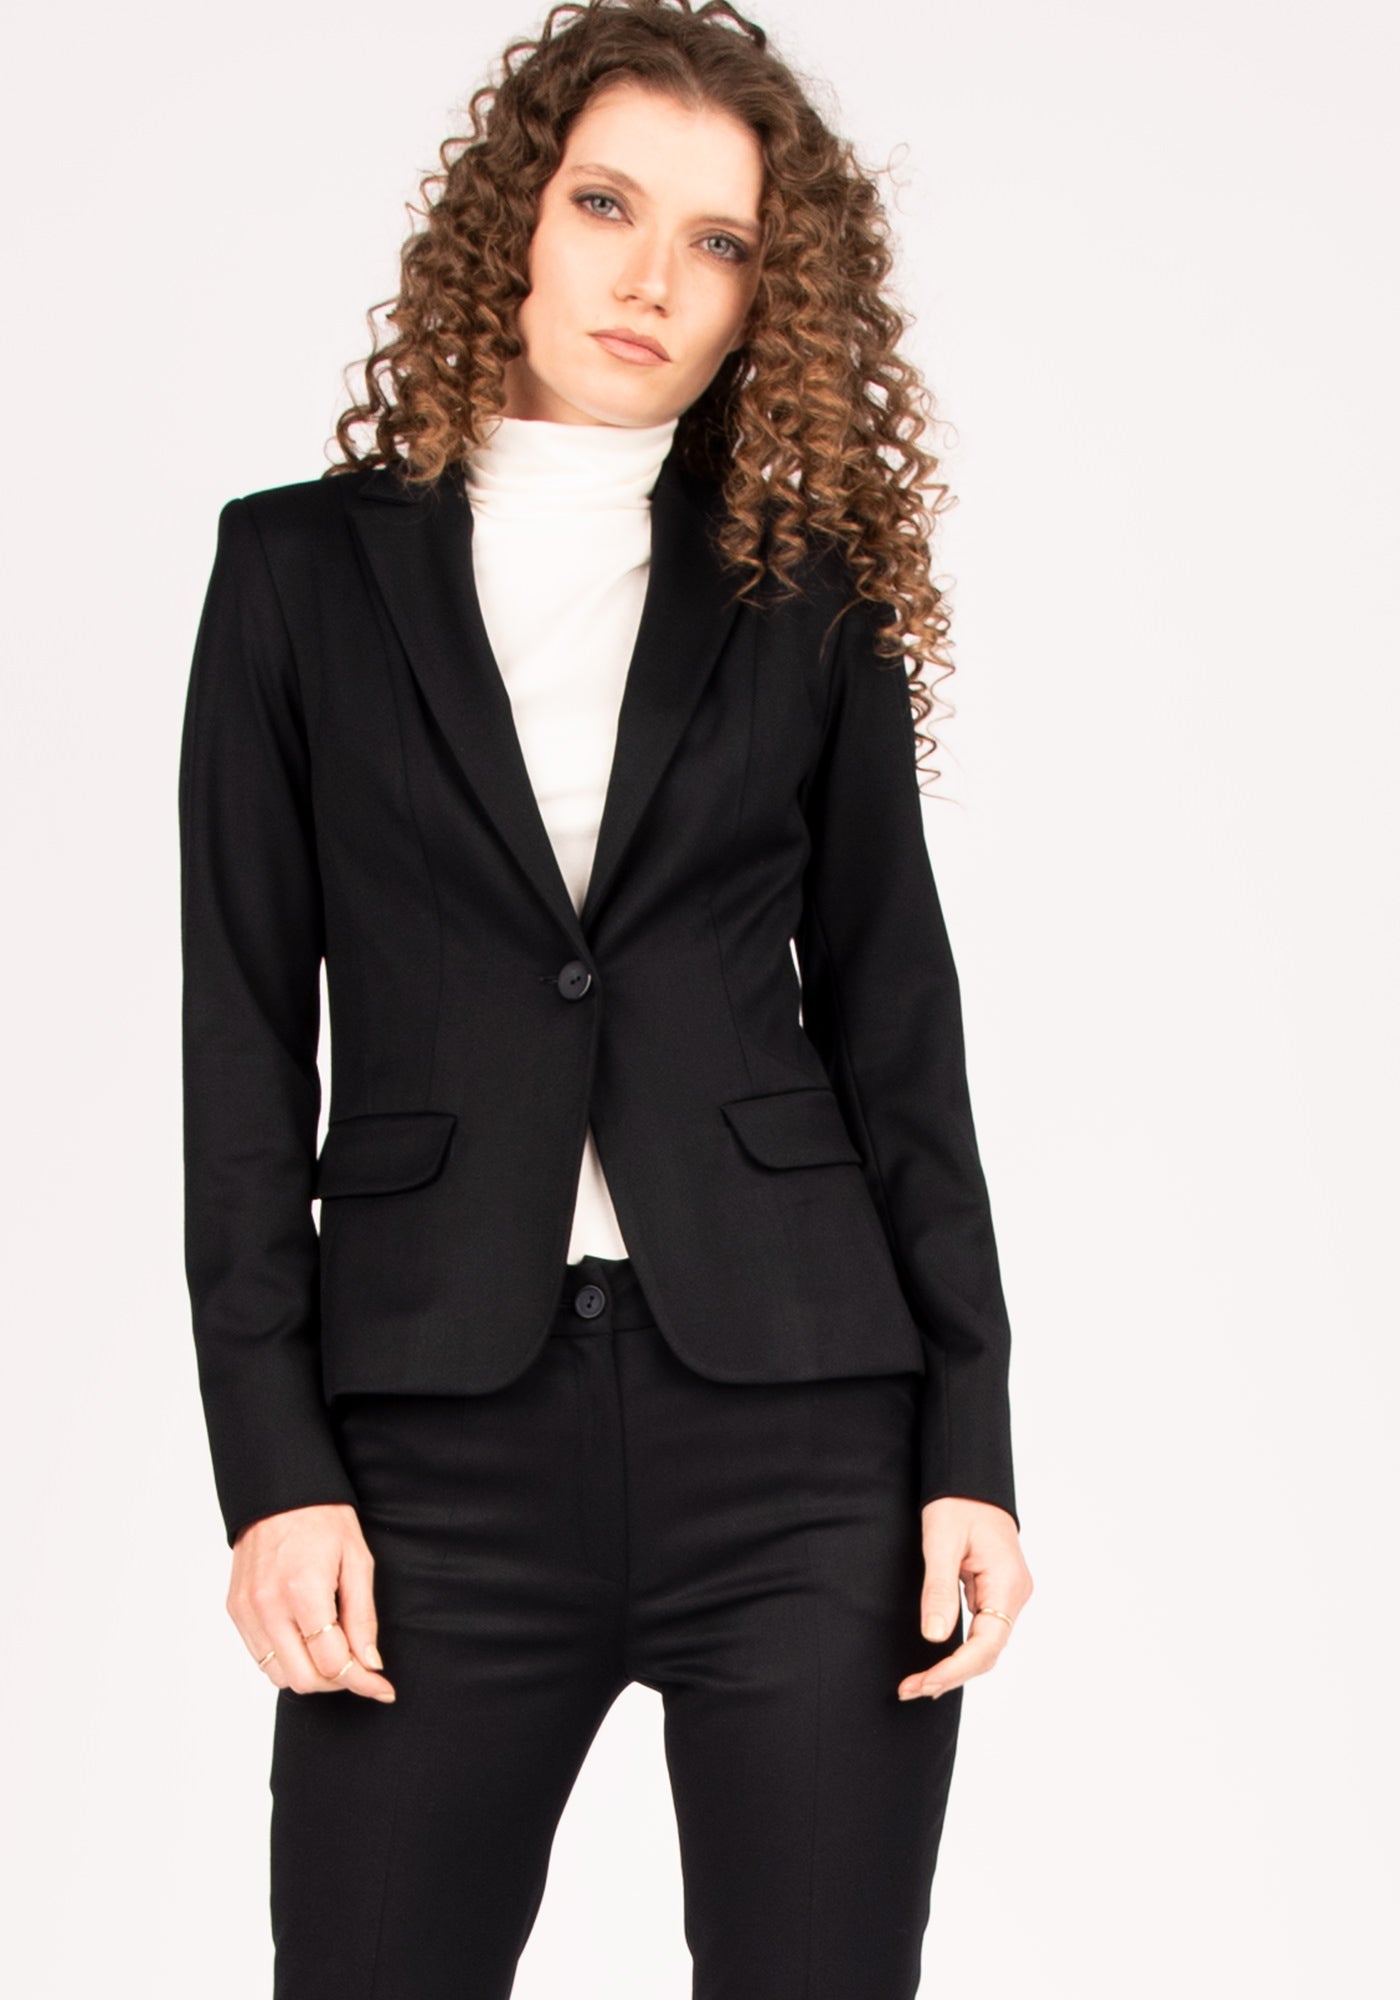 Women's Tailored Office Pant suit in Navy